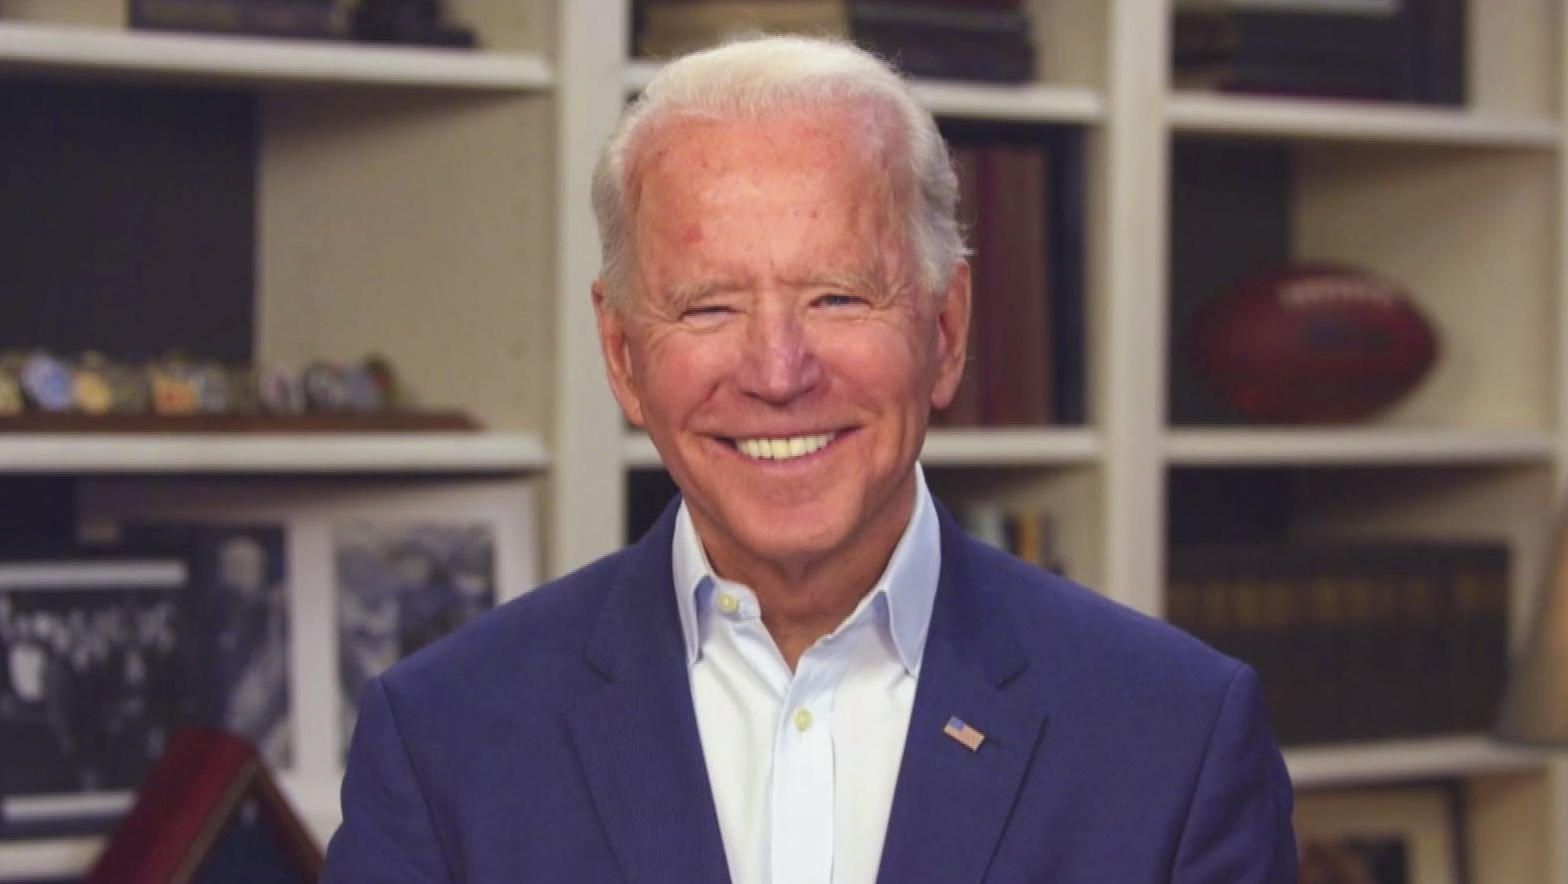 A candidate in isolation: Joe Biden's cloistered campaign